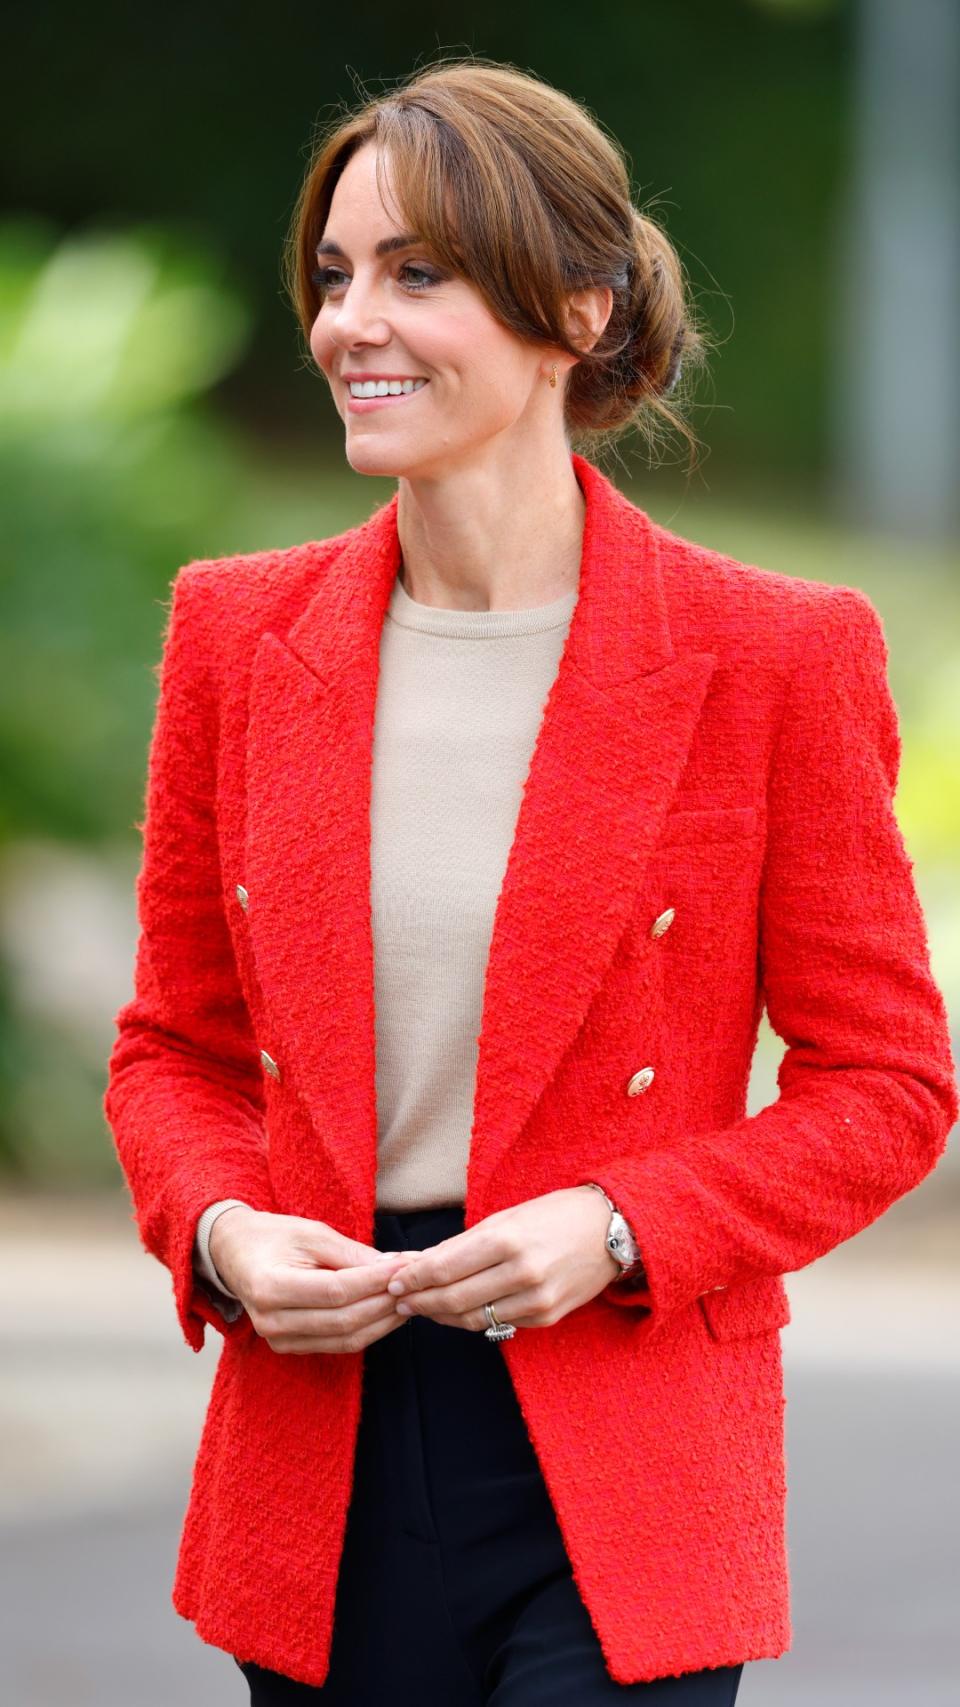 Kate Middleton's relaxed hairstyle